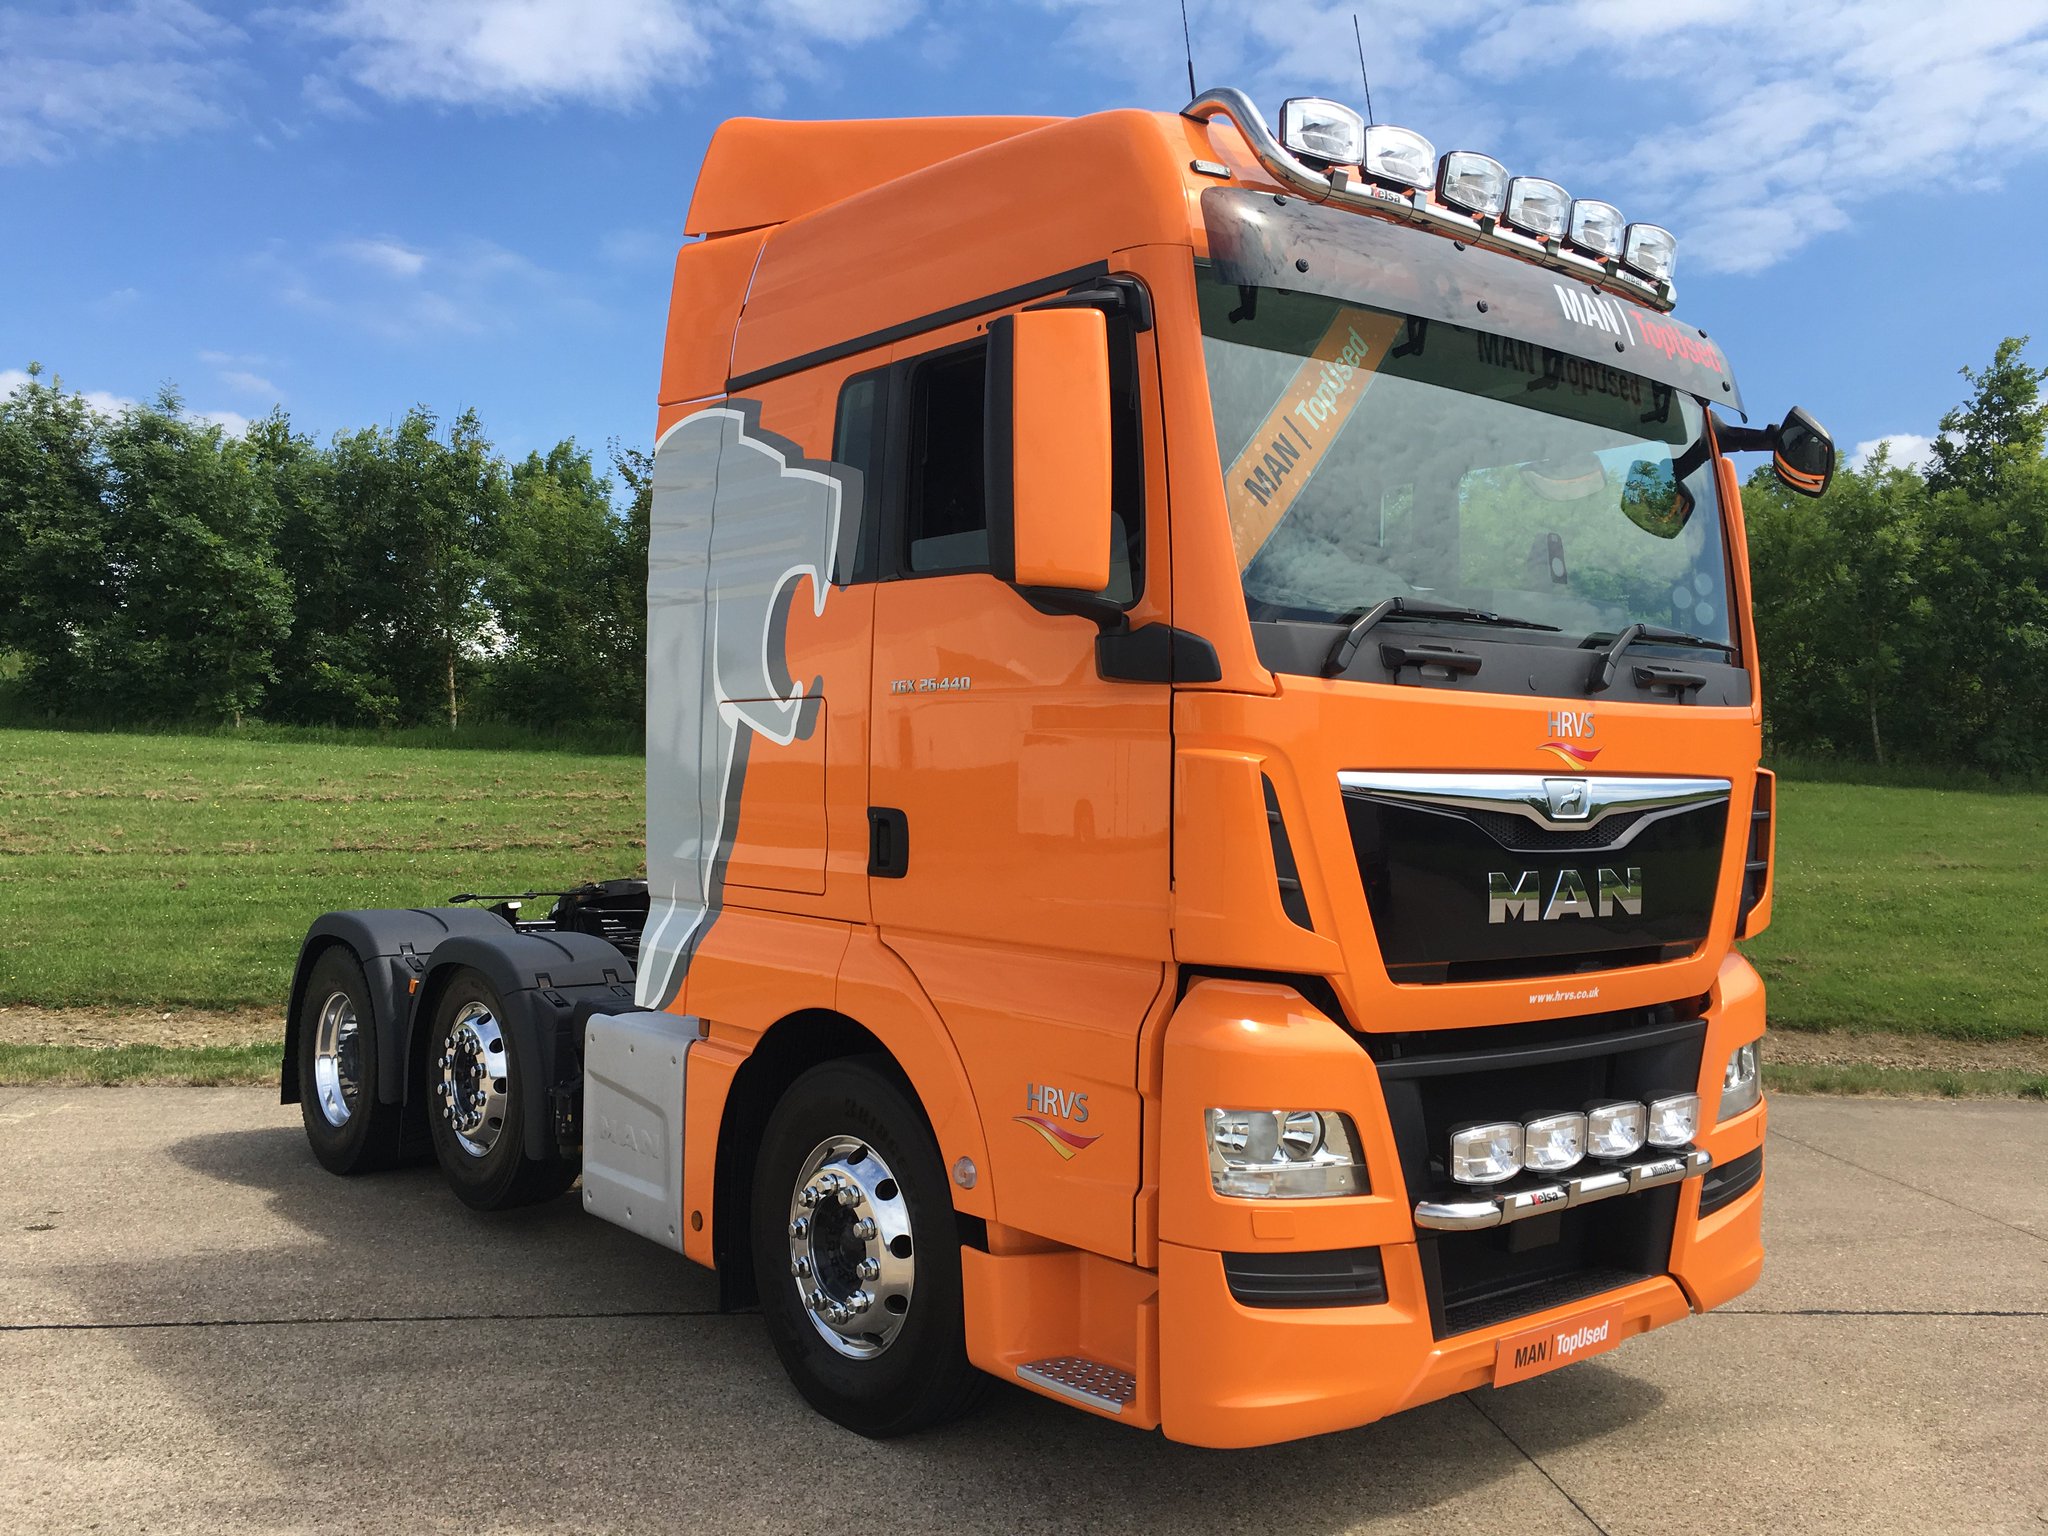 Auto Tilskyndelse jug MAN Truck & Bus UK on Twitter: "The future's bright the future's orange for MAN  TopUsed at MAN Truck &amp; Bus - Ride and Drive 2018. This mint fully  checked over and